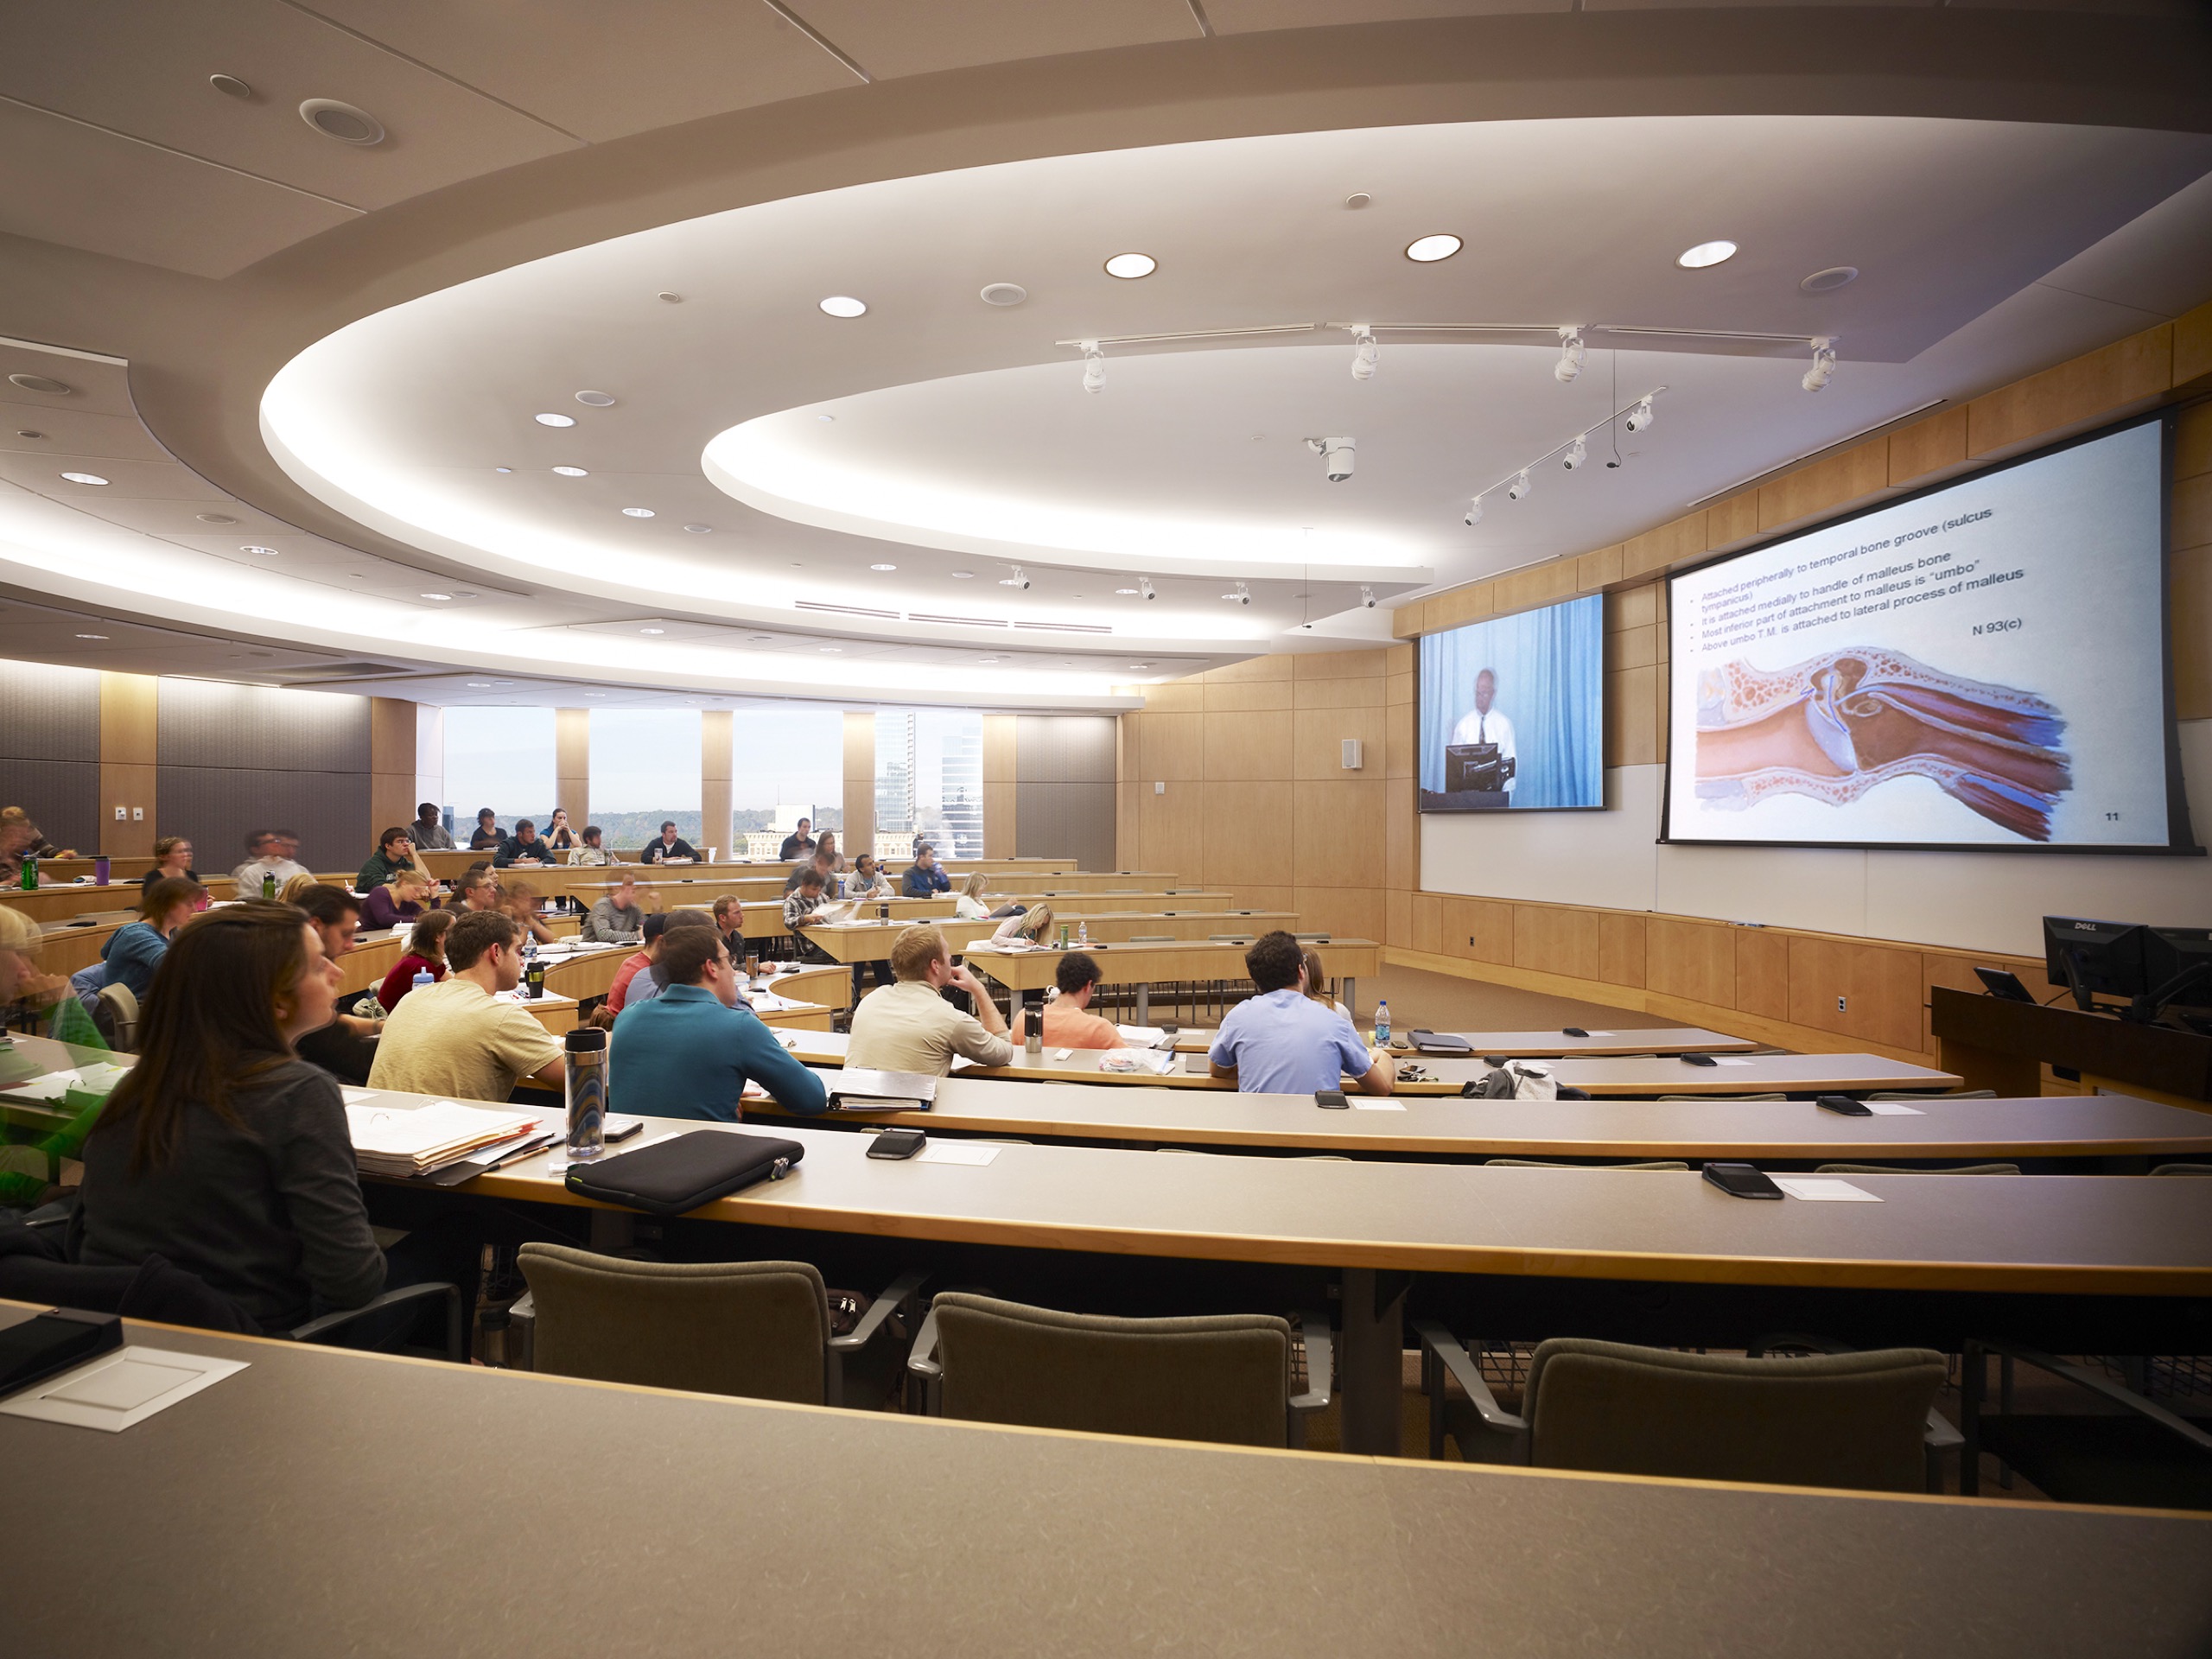 Michigan State University Secchia Center Lecture Hall with AV projection screens